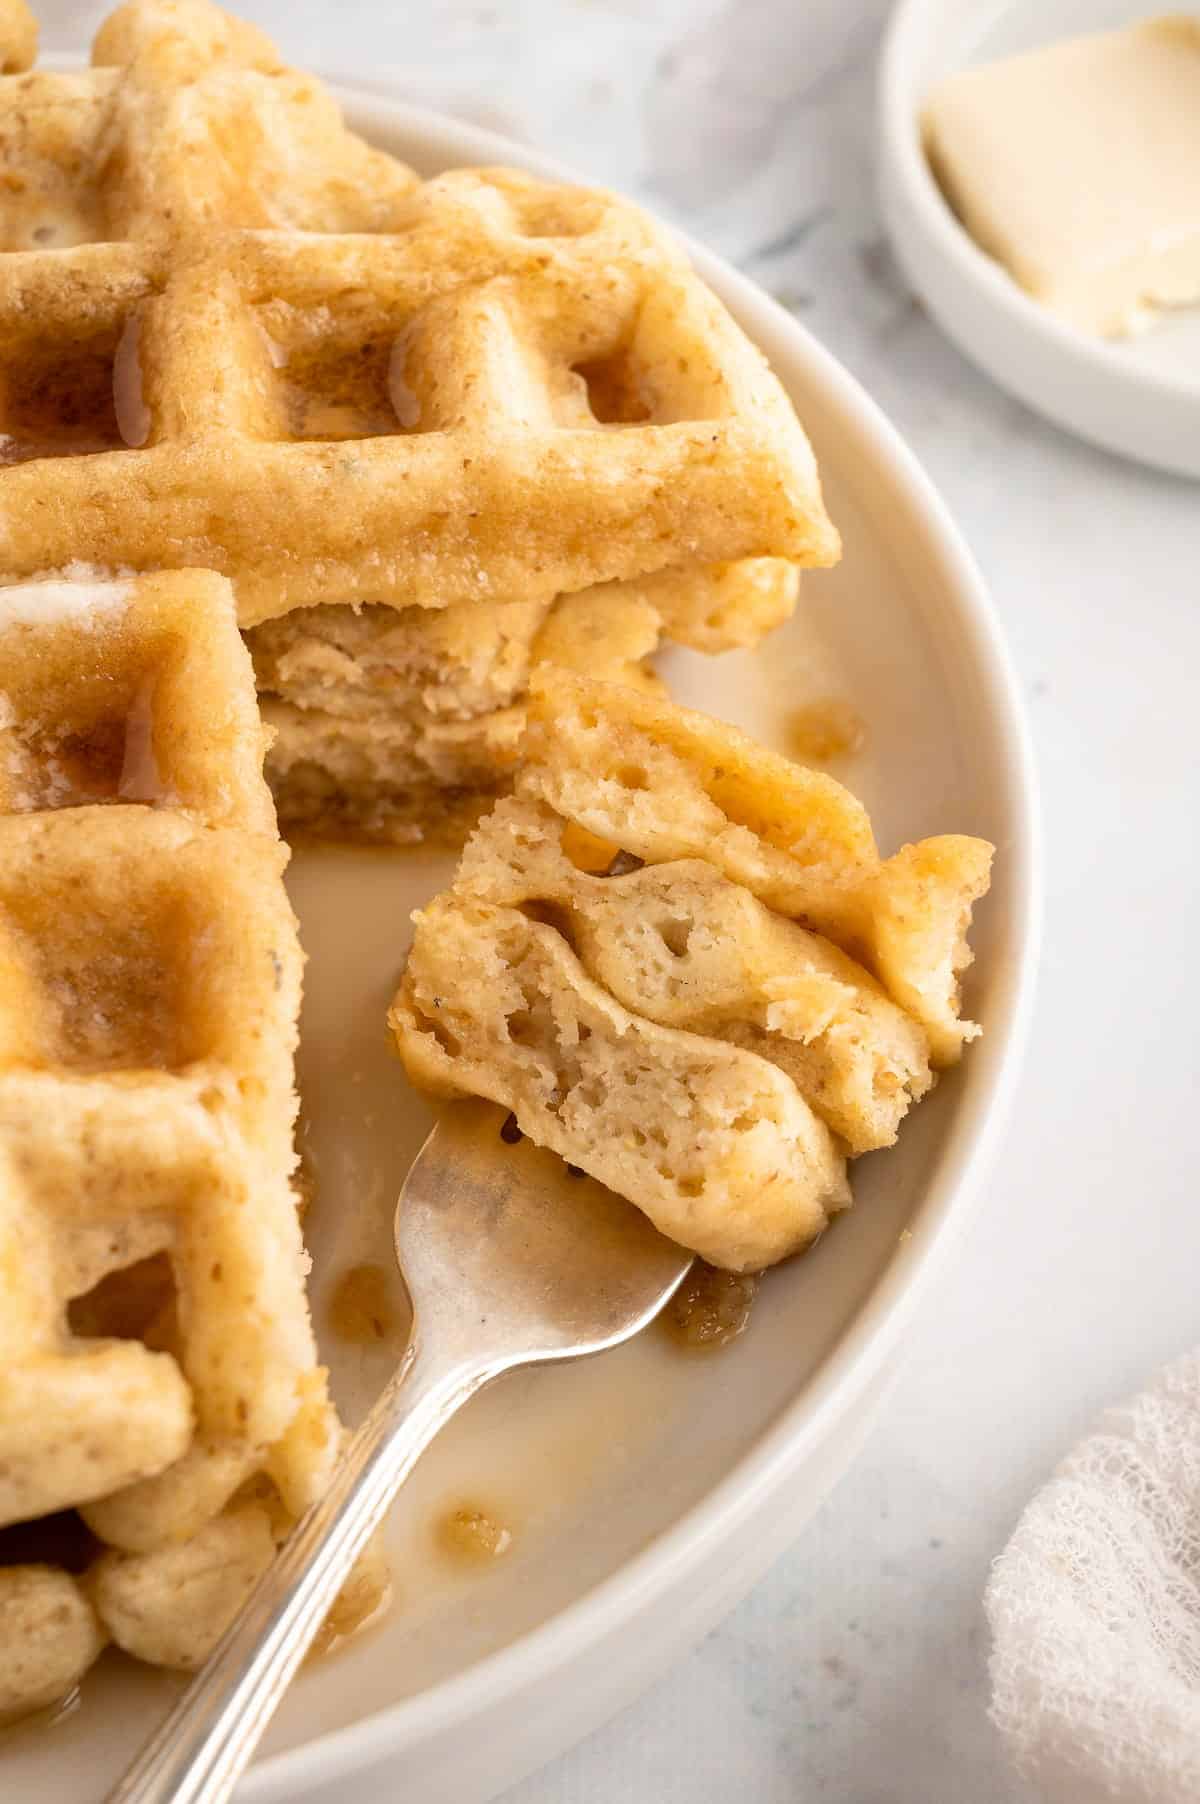 Vegan waffles cut to show the fluffy inside texture.